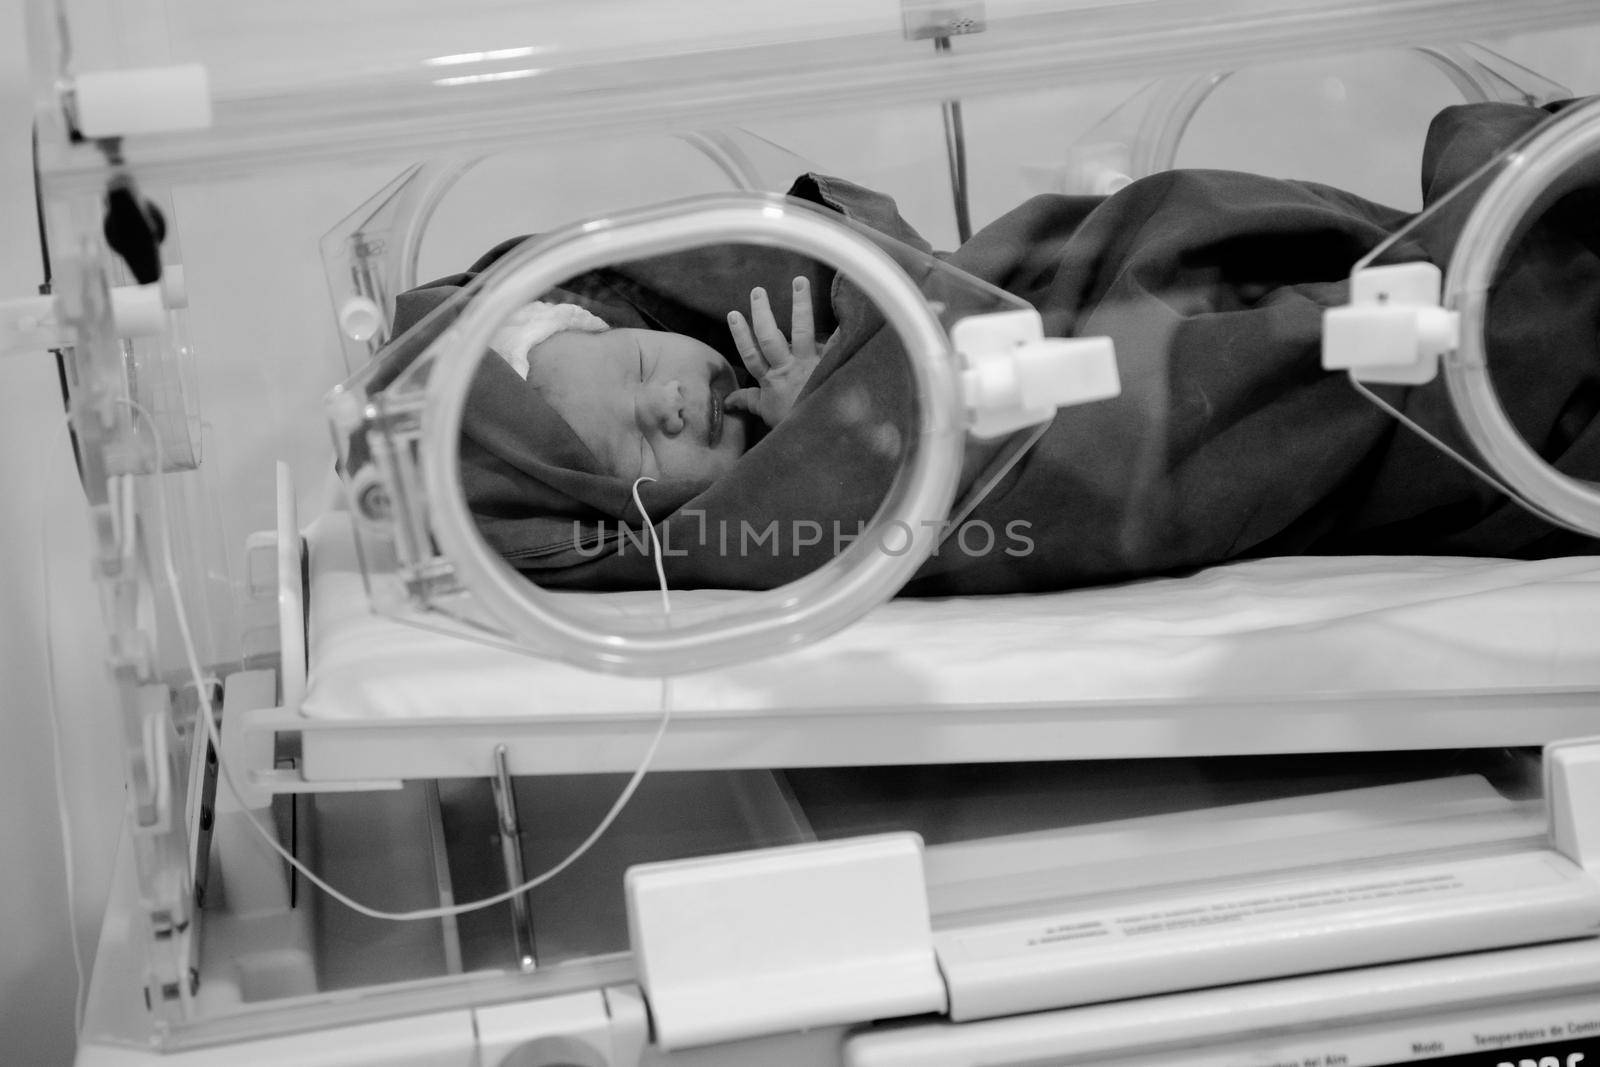 Newborn in the first few minutes of life in a hospital room.